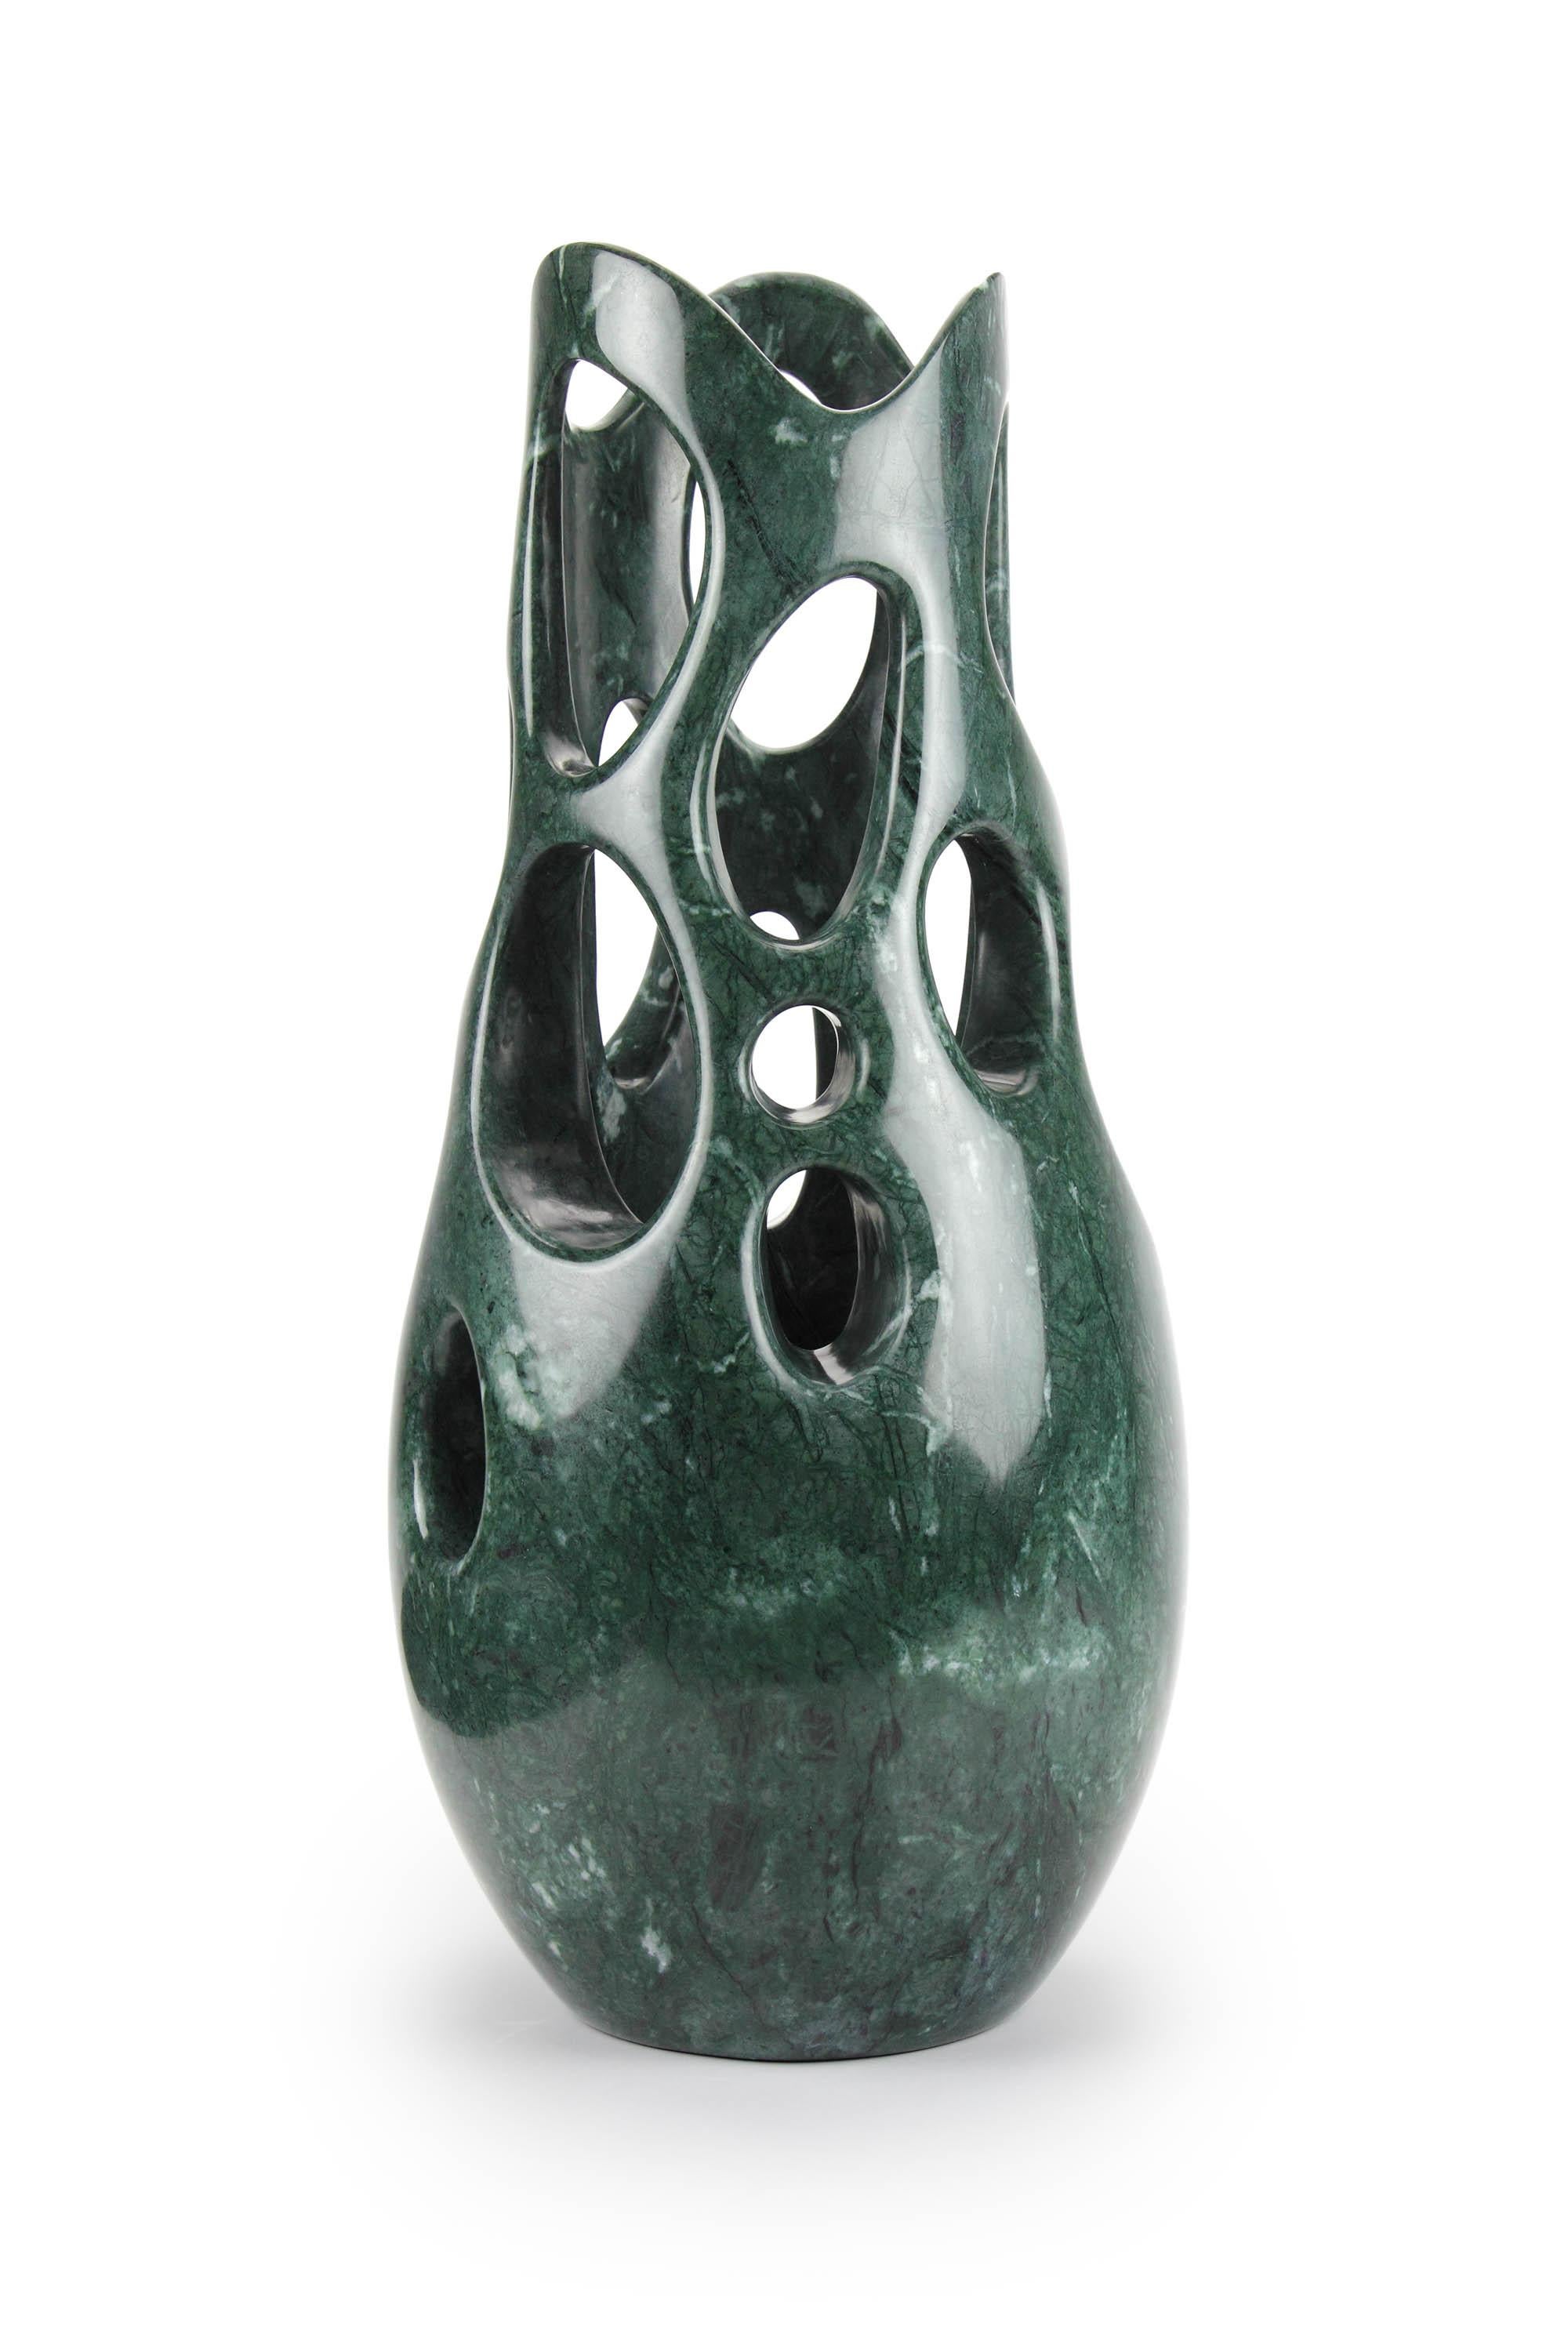 Important sculptural vase carved by hand from a solid block of Imperial green marble.

Vase dimension: D 30 x H 67 cm. Available in different marbles, onyx and quartzite. 

Limited edition of 35.

Each vase is hand signed and numbered by the artists